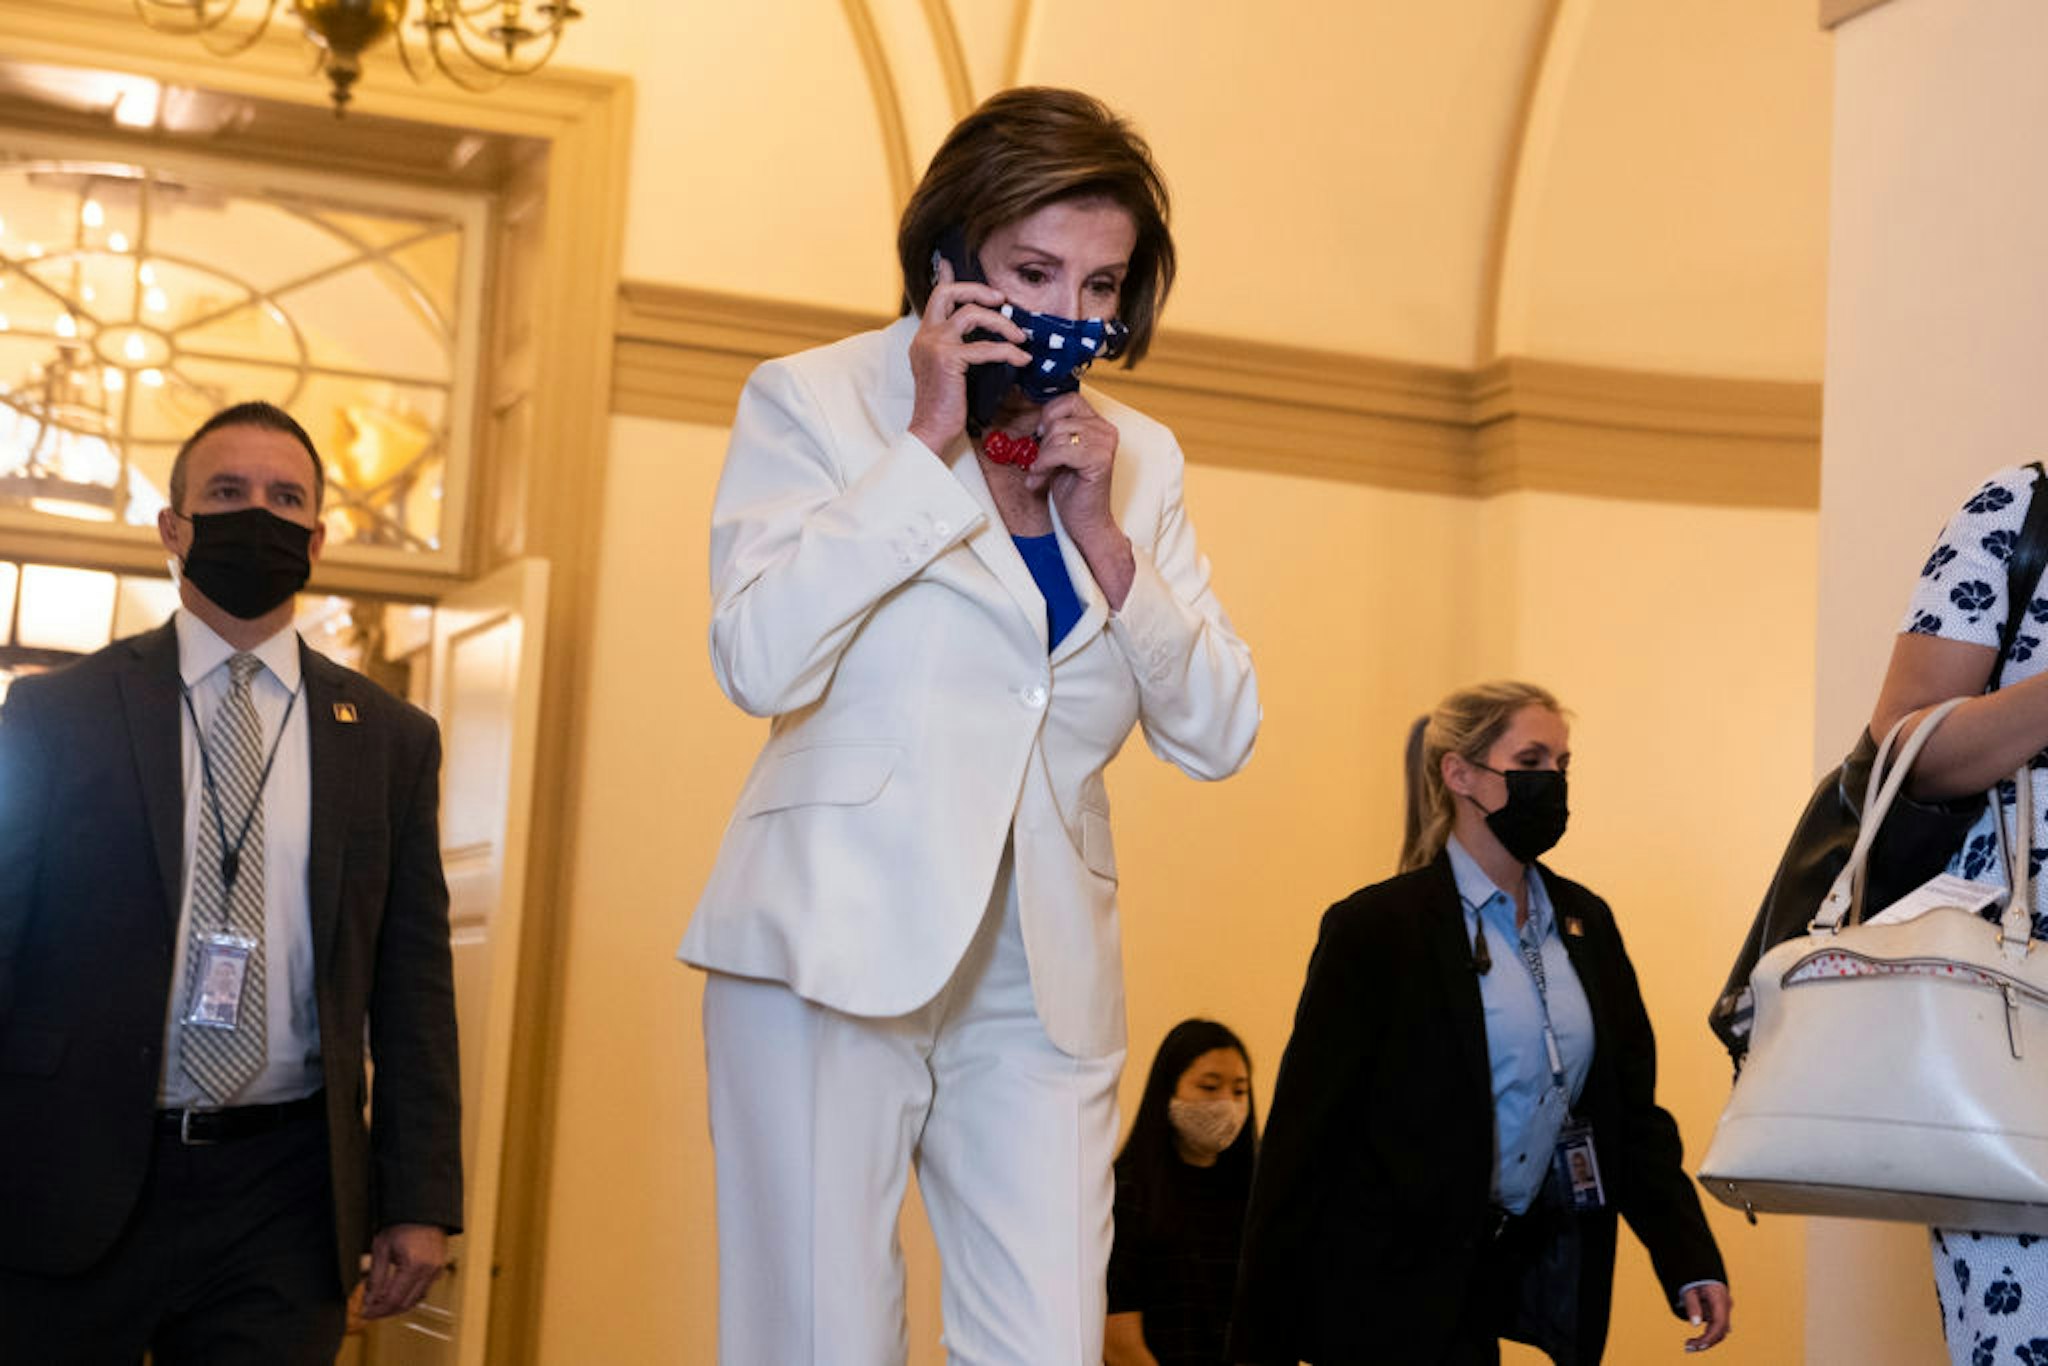 UNITED STATES - MAY 20: Speaker of the House Nancy Pelosi, D-Calif., arrives to the Capitol on Thursday, May 20, 2021. (Photo By Tom Williams/CQ-Roll Call, Inc via Getty Images)